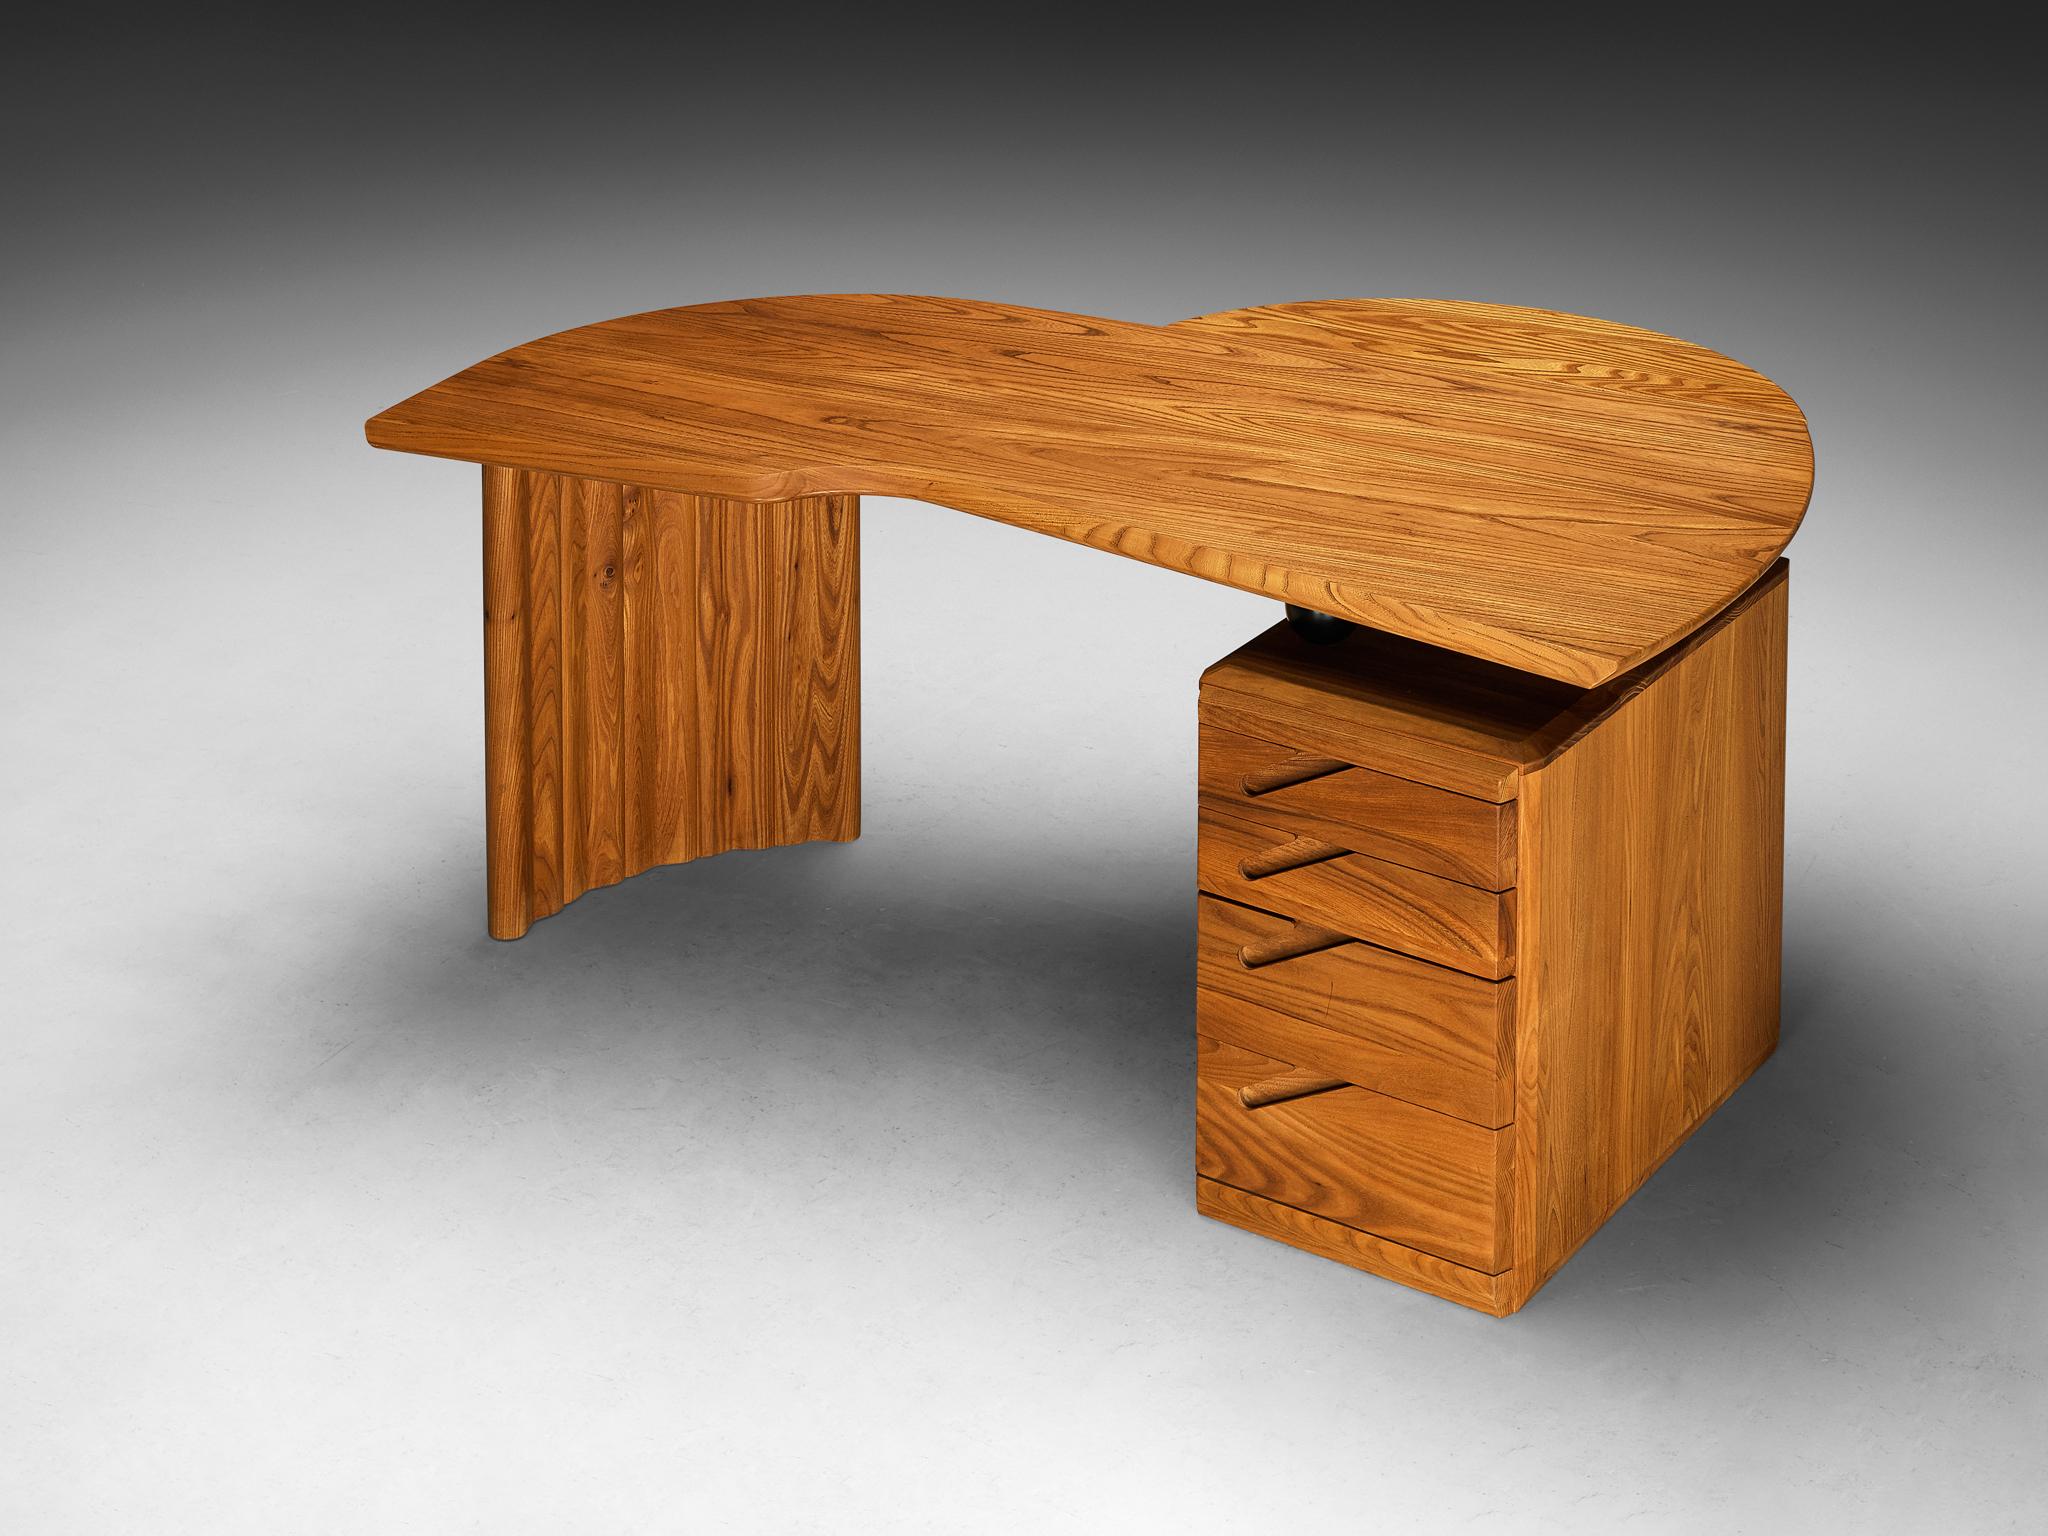 Ebénisterie Seltz, writing desk, solid elm, France, 1980s

Situated in a small French region Alsace, Ebénisterie Seltz gained prominence as a workshop recognized for crafting, among others, Pierre Chapo's designs in the 1970s and 1980s.